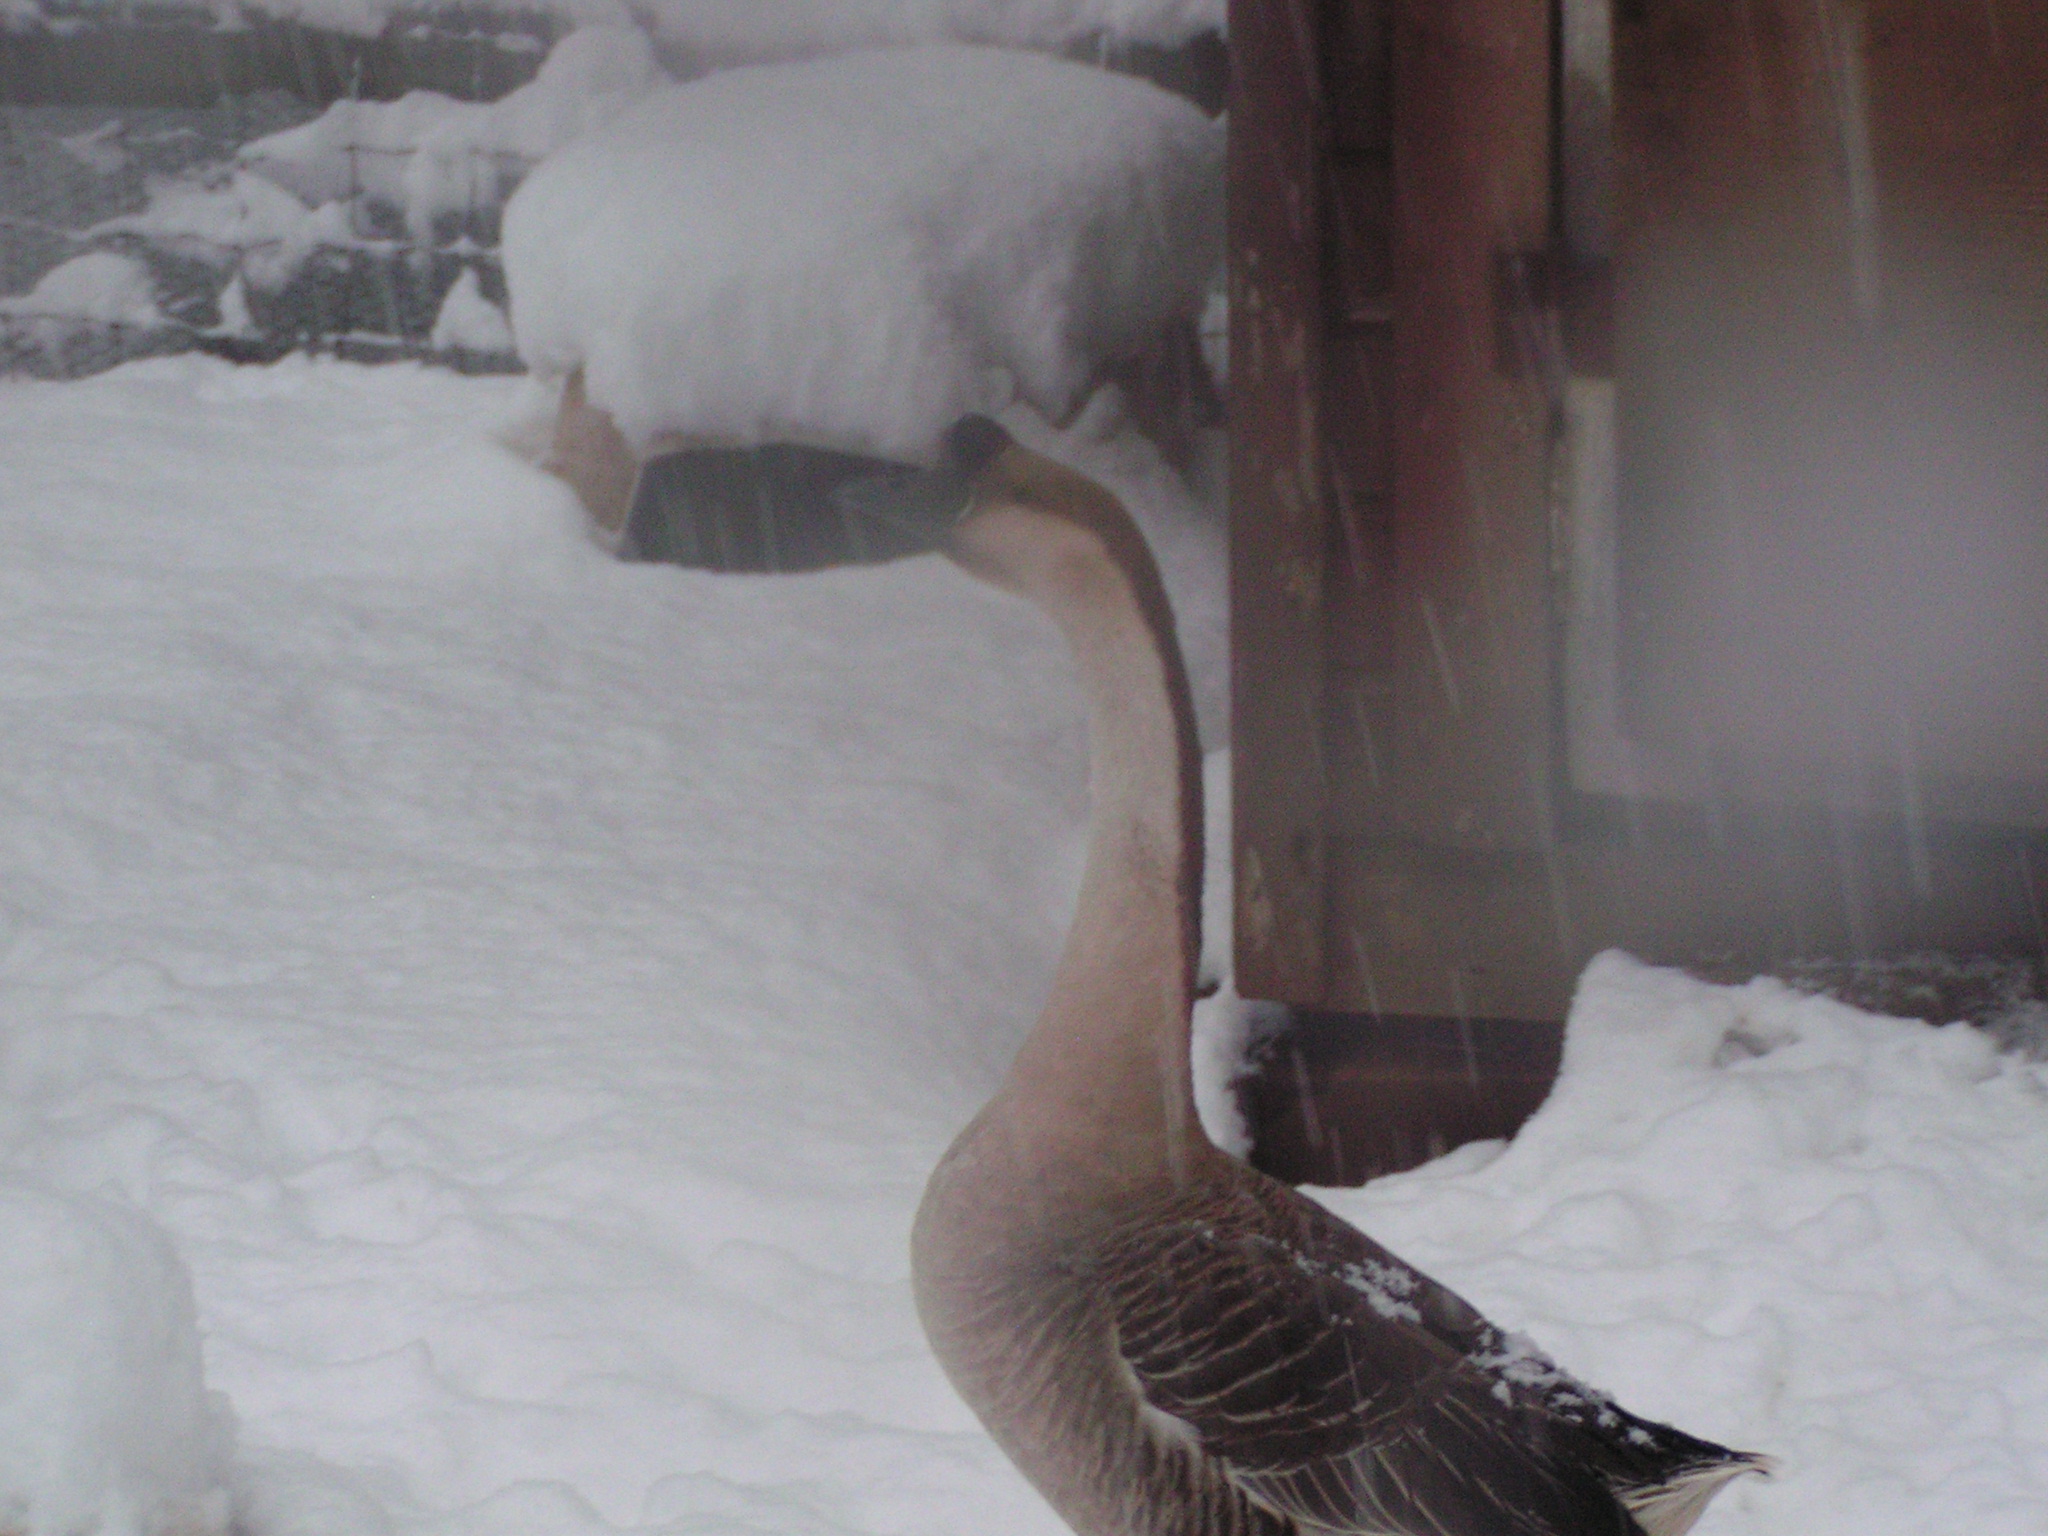 My goose that I save from slaughter. His name is Sammie and he is my baby. I love him so much!!!